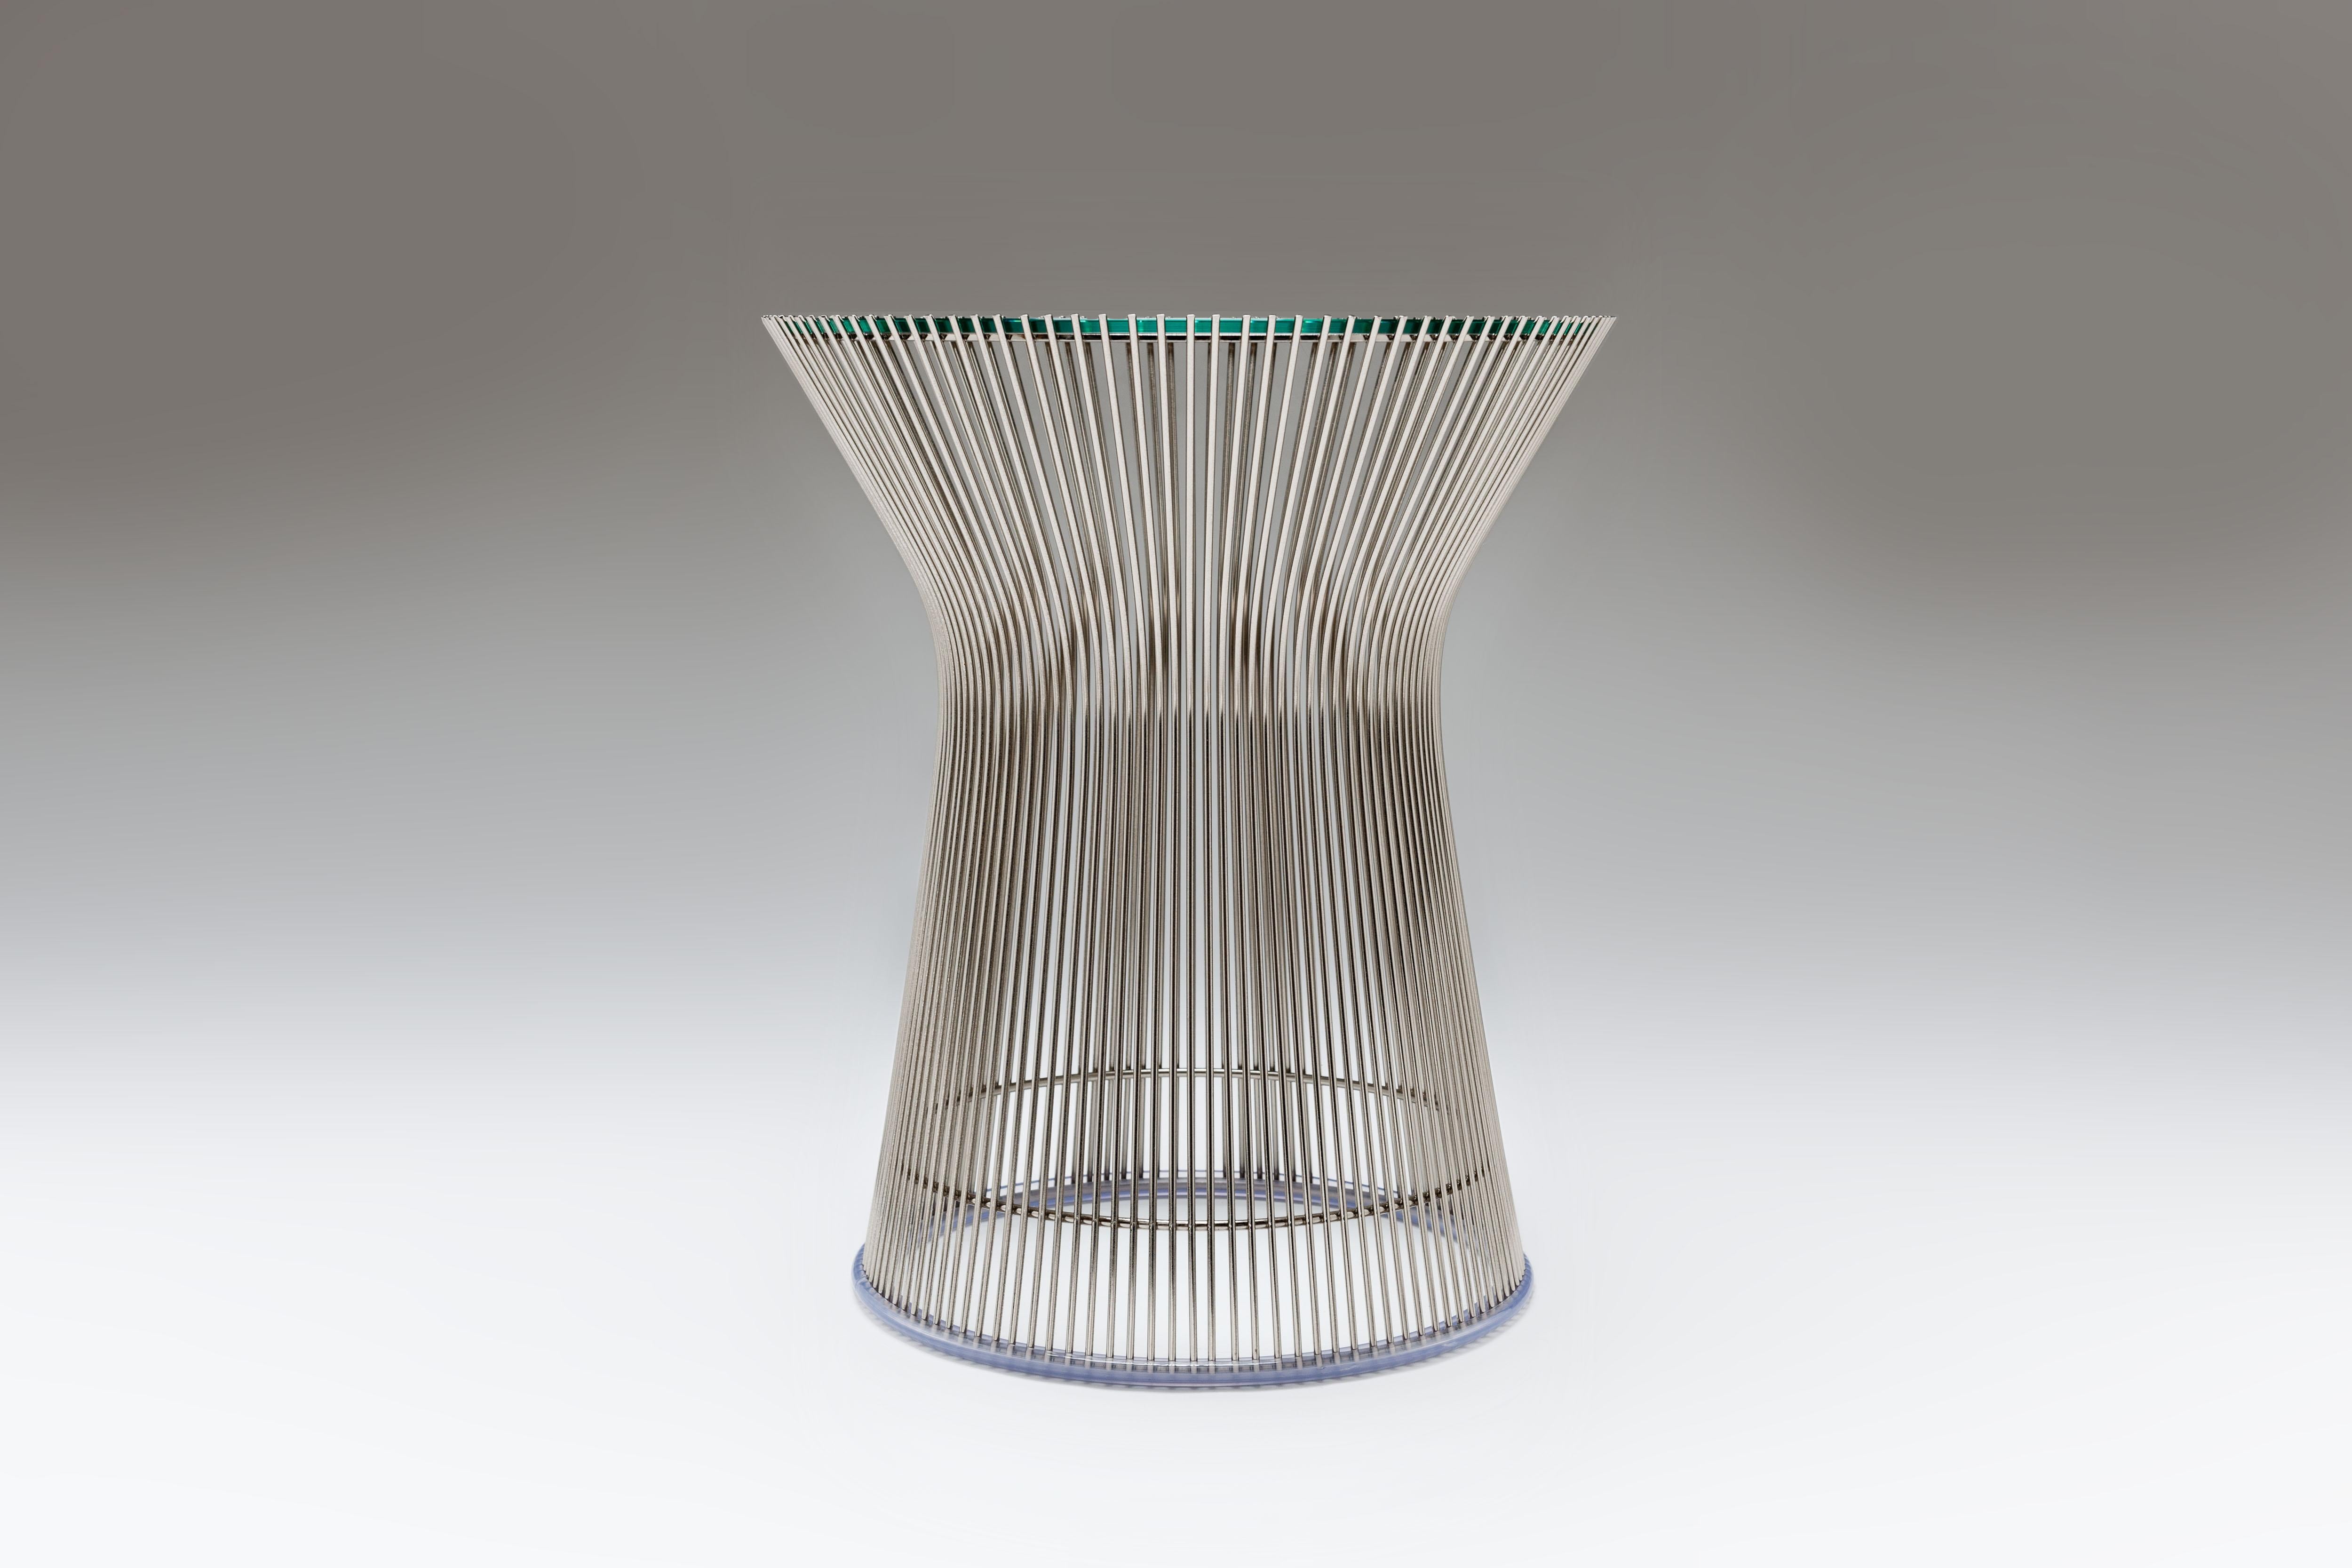 Nickel plated steel wire rods side table by Warren Platner for Knoll International with transparent glass tabletop. 
Exquisite craftsmanship, all rods are completely hand welded. 

Part of the wire series designed by Warren Platner in 1966. Executed